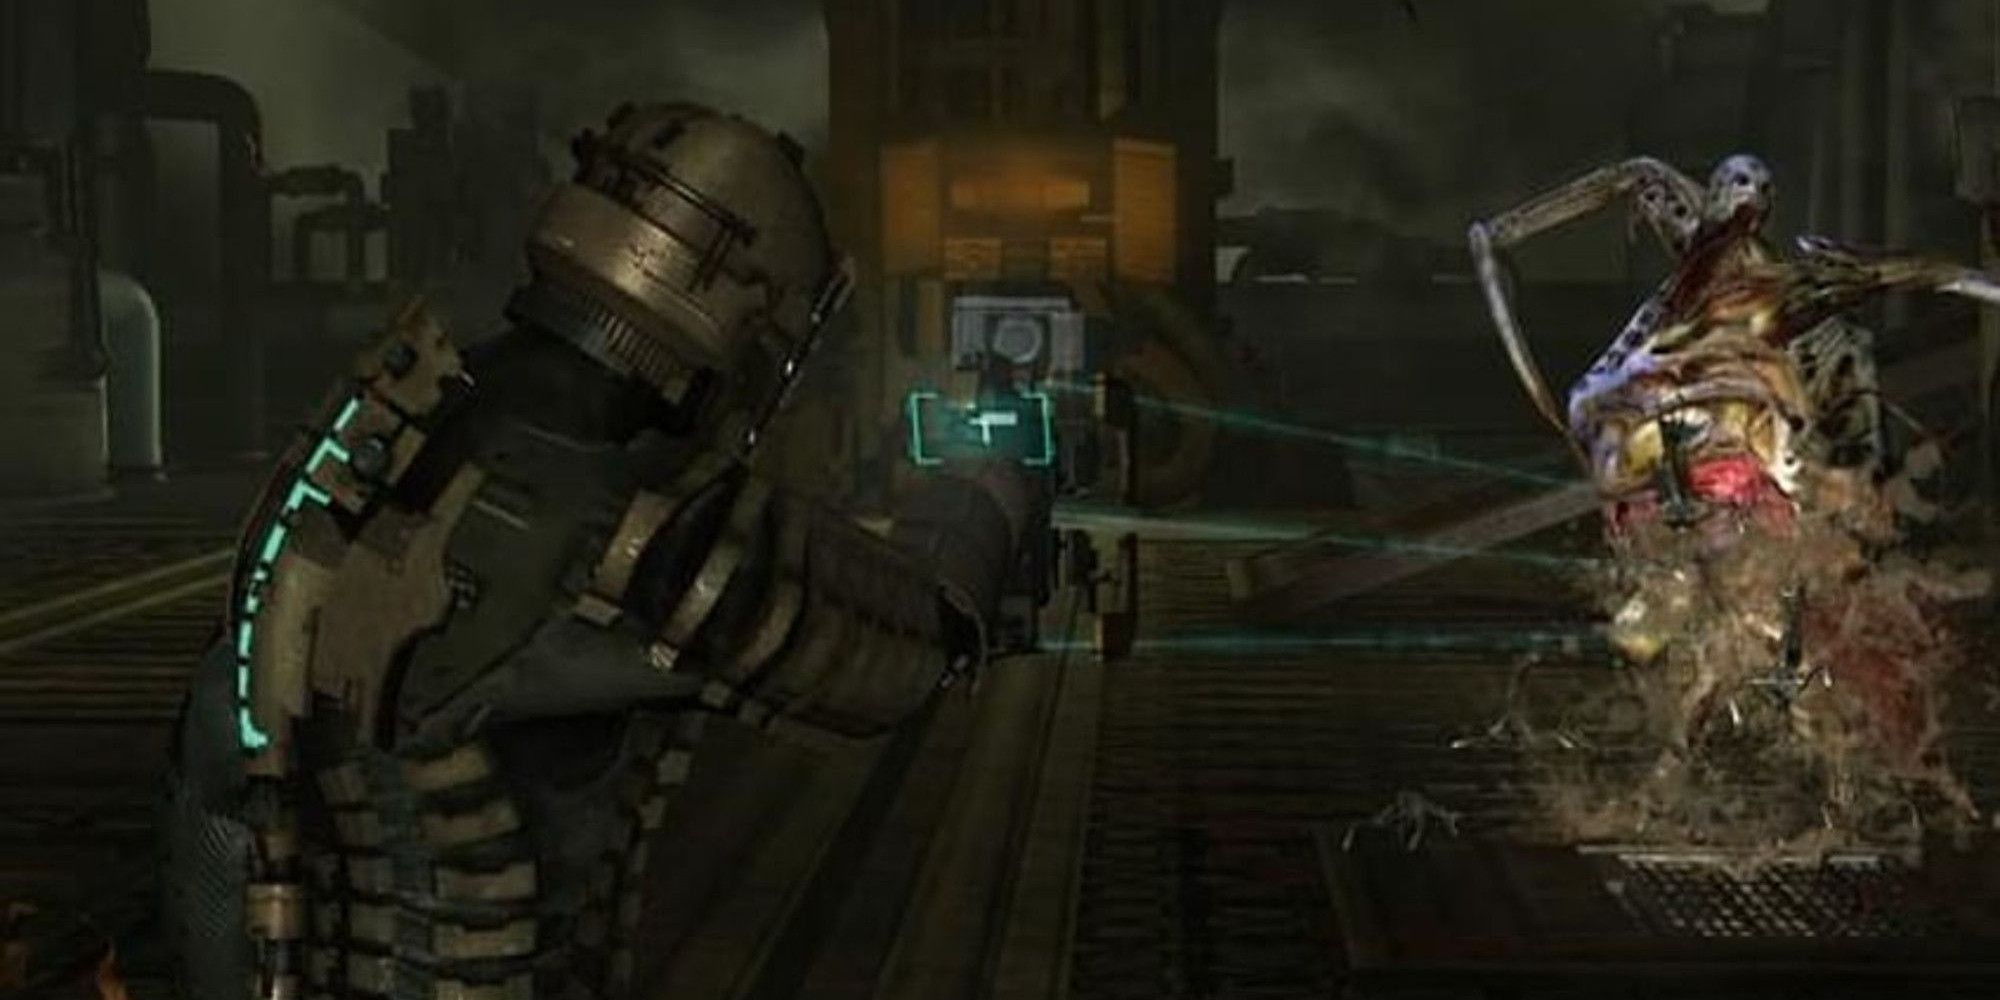 Isaac Clarke takes down a Necromorph with a Ripper in Dead Space 2